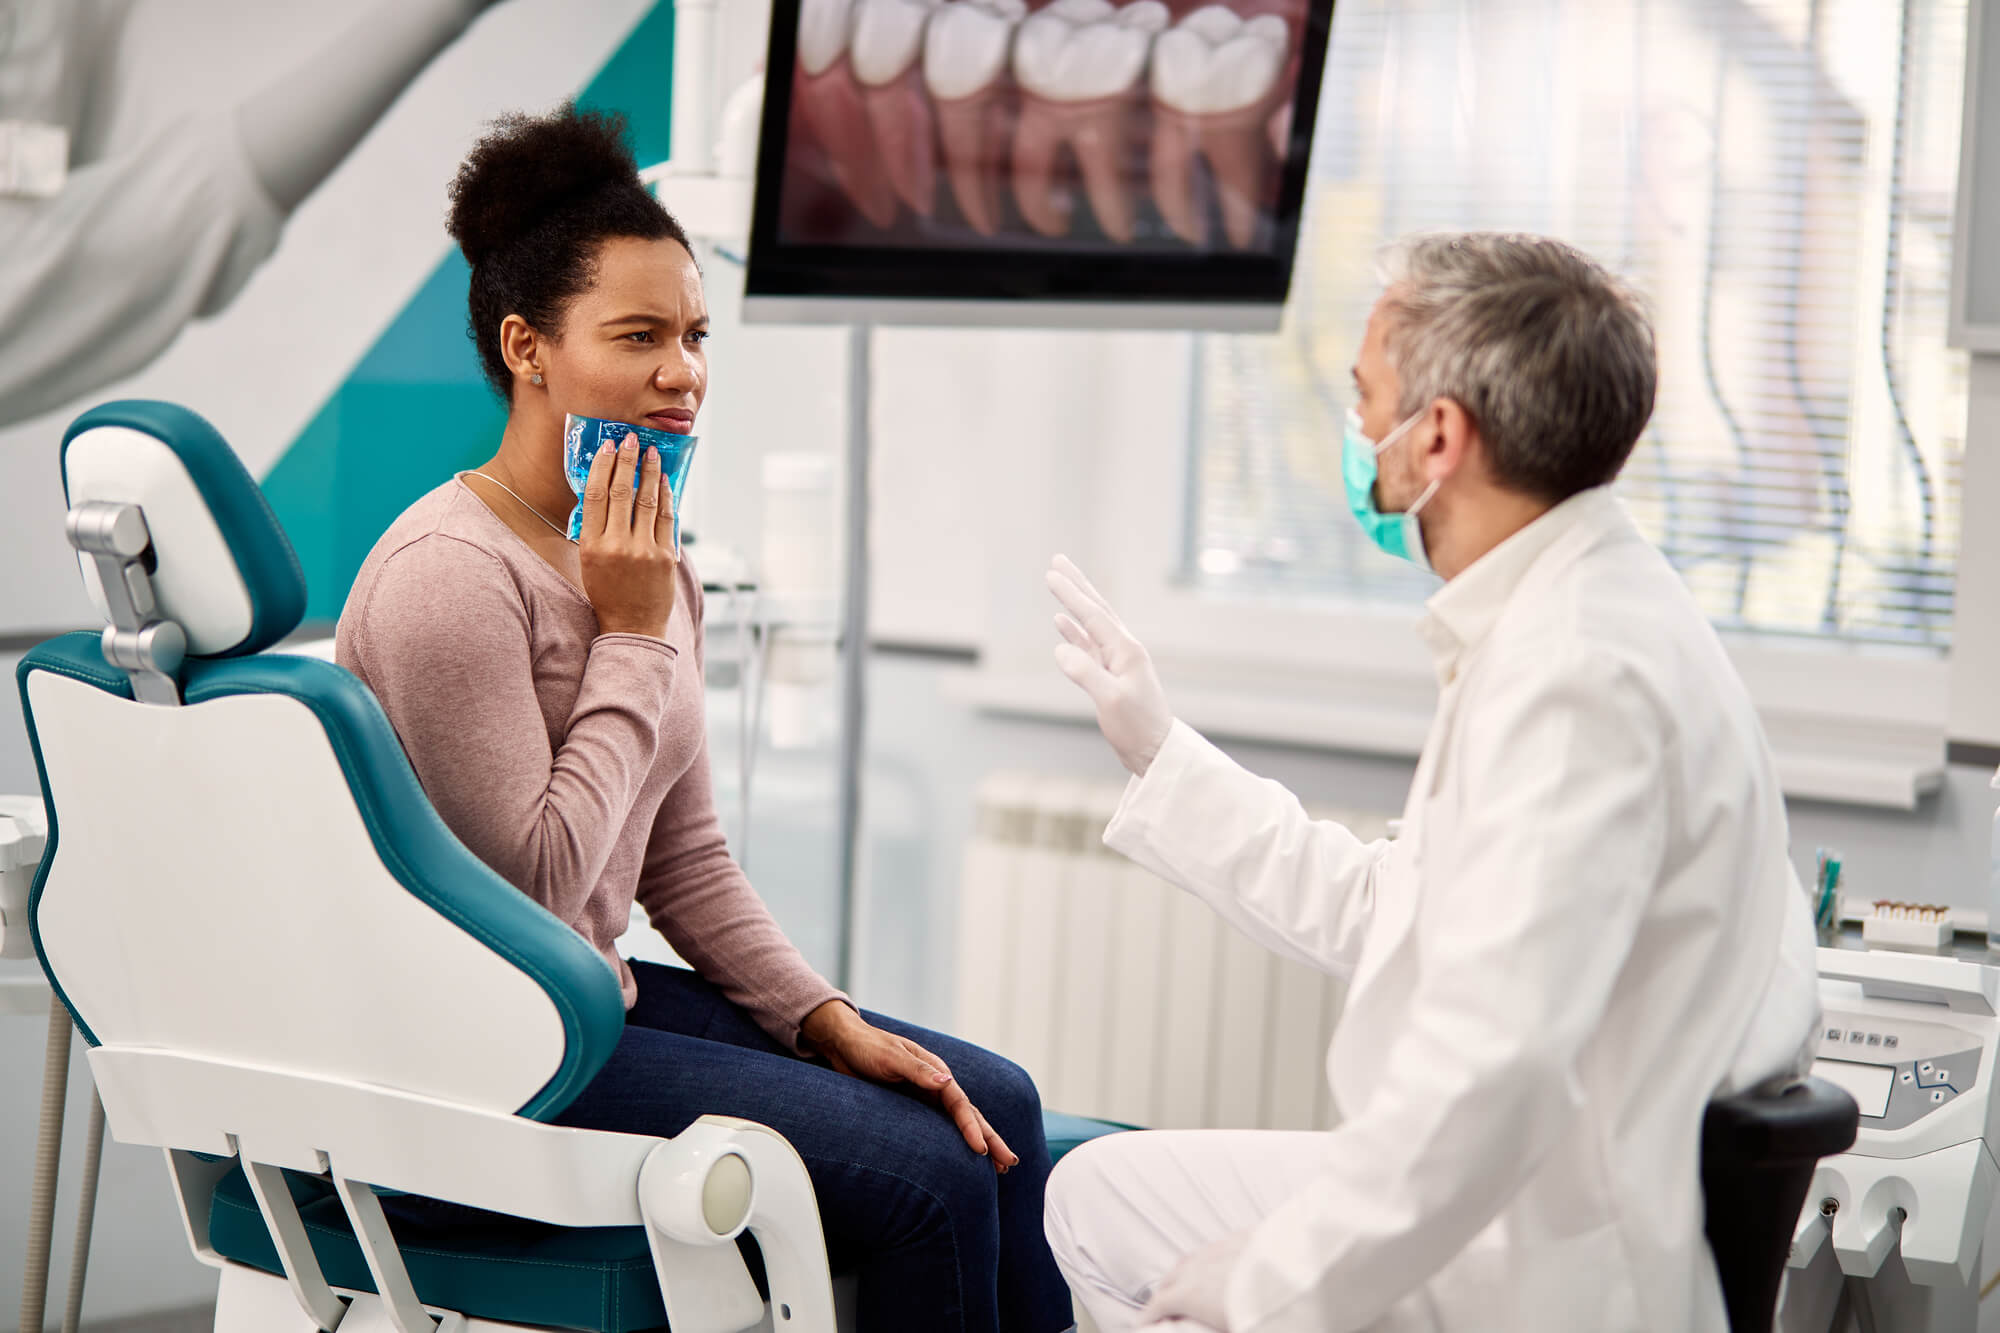 African-American-woman-with-toothache-holding-cooling-gel-on-her-jaw-while-communicating-with-stomatologist-during-dental-check-up-at-dentists-office